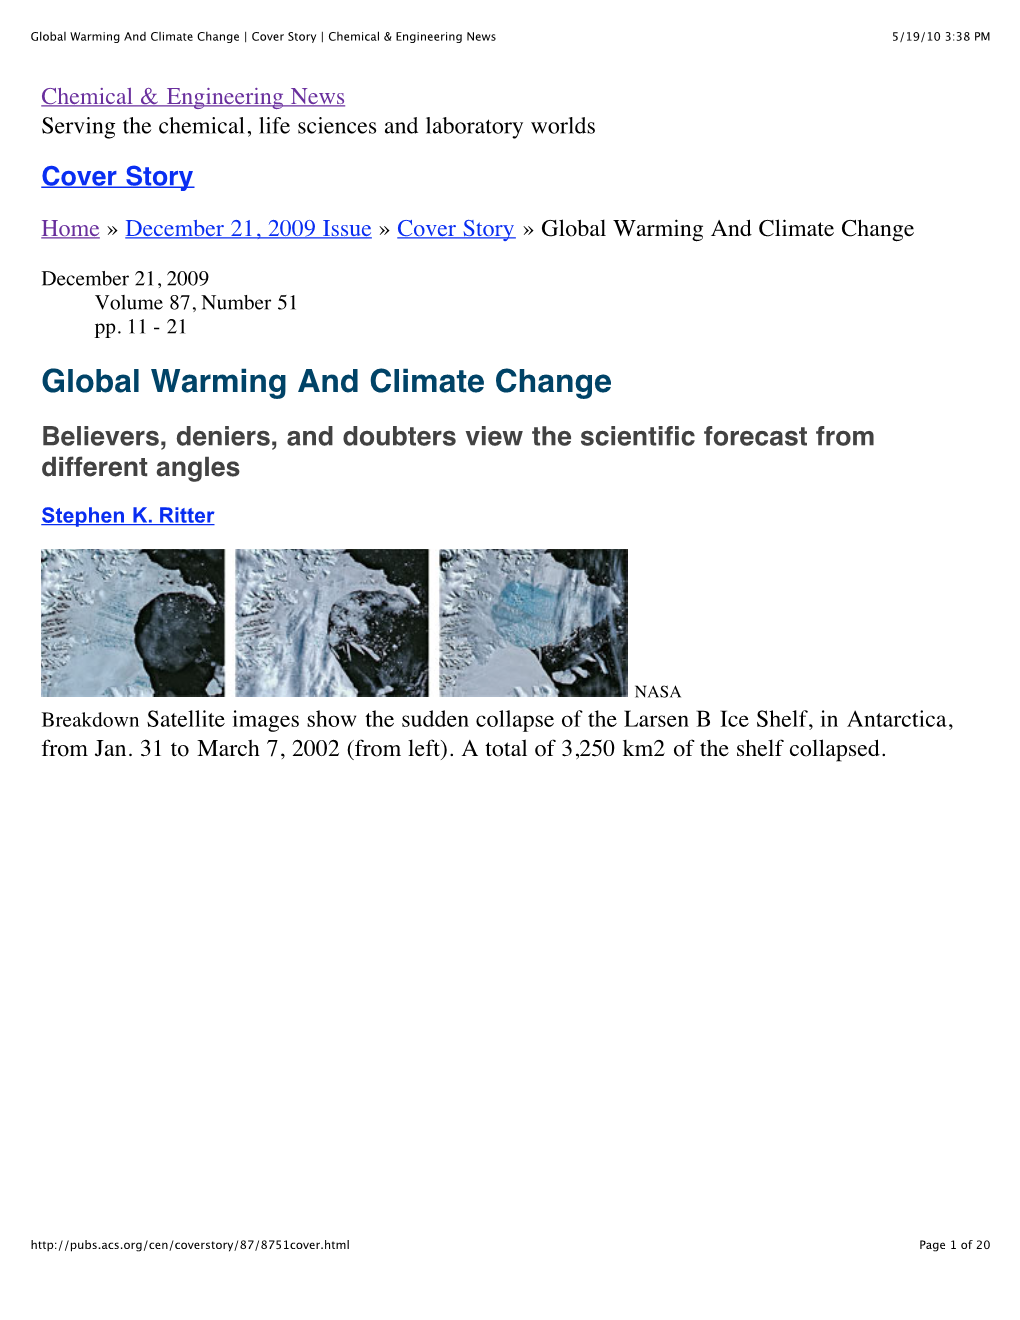 Global Warming and Climate Change | Cover Story | Chemical & Engineering News 5/19/10 3:38 PM